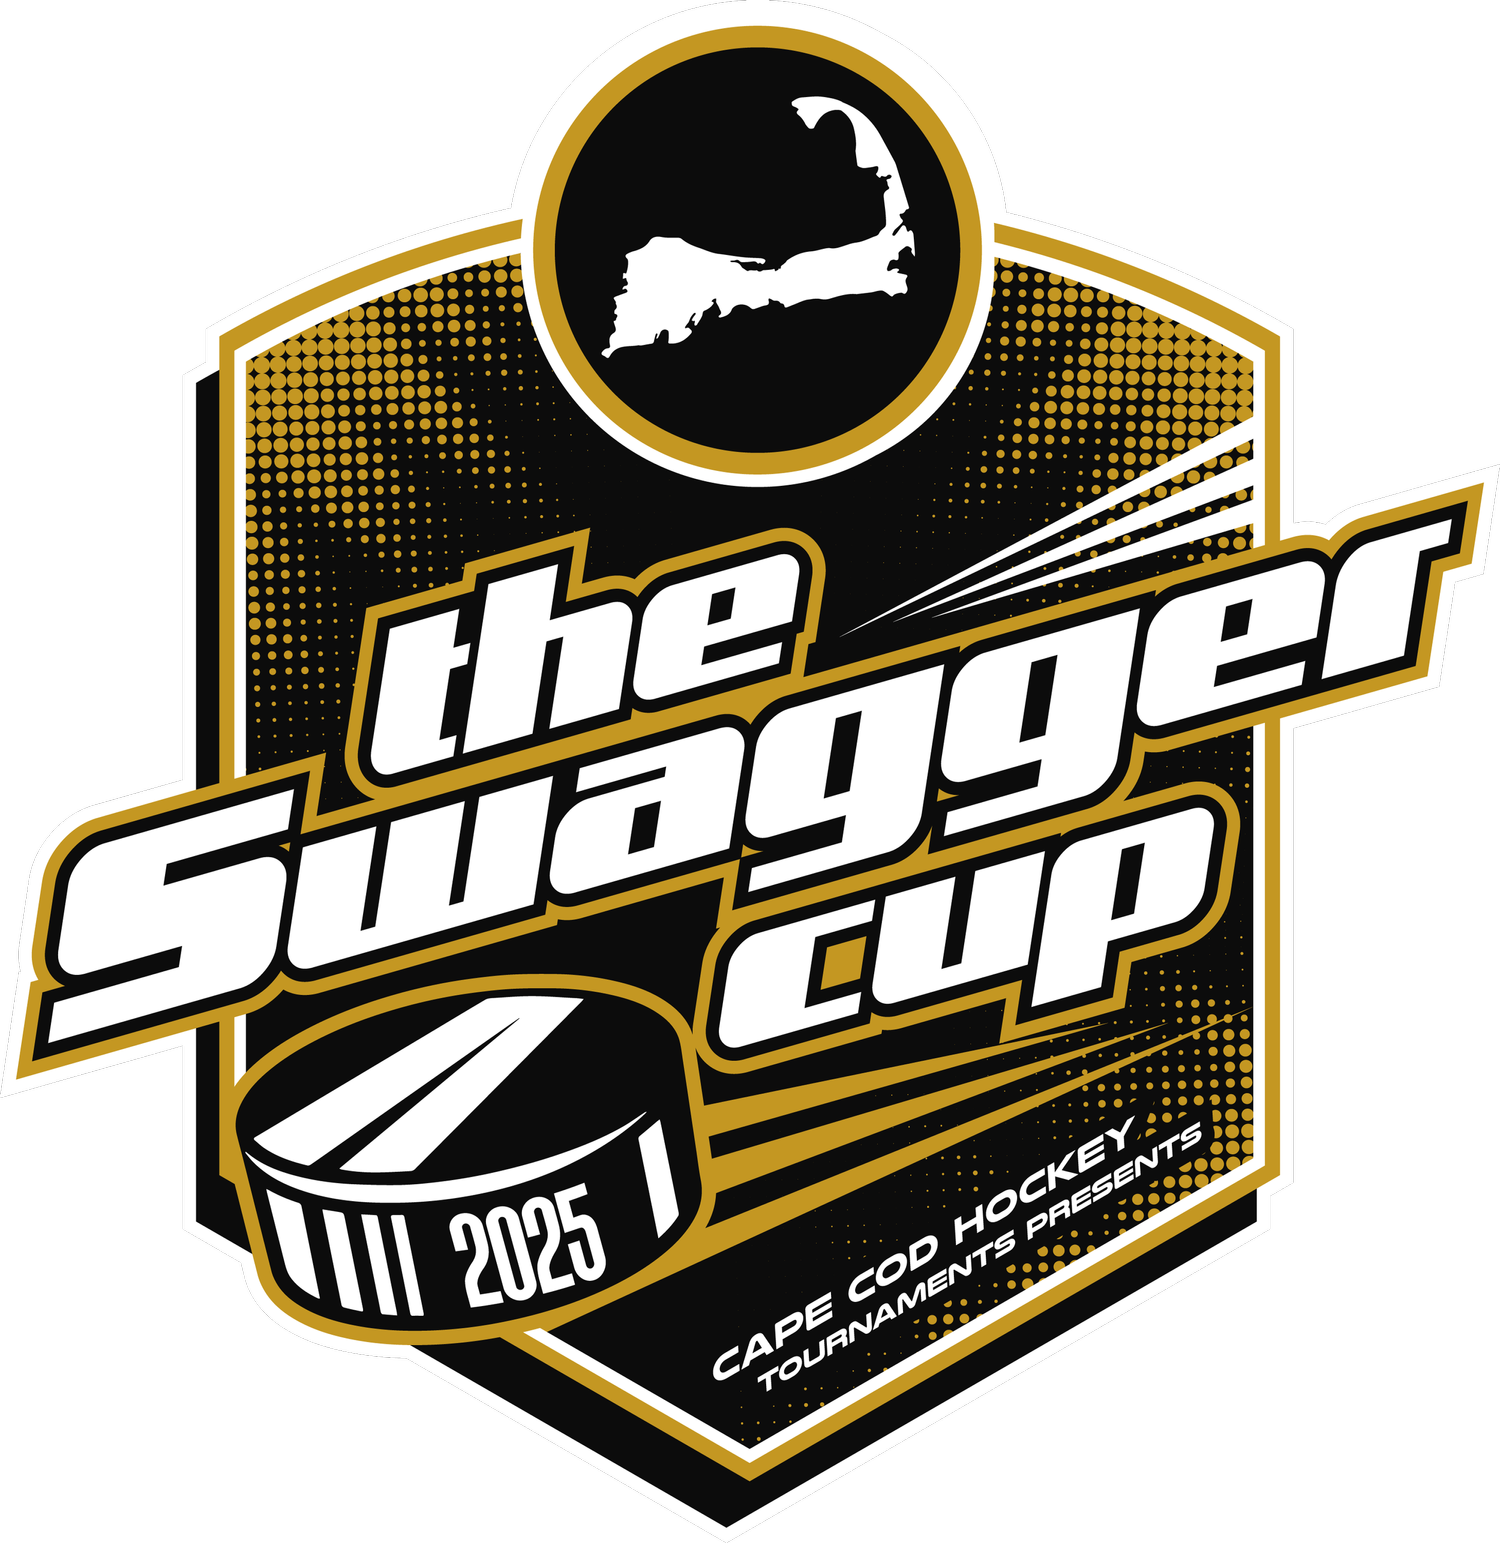 HOCKEY Swagger — - COD Squirt CAPE TOURNAMENTS USAH IV-B Tier